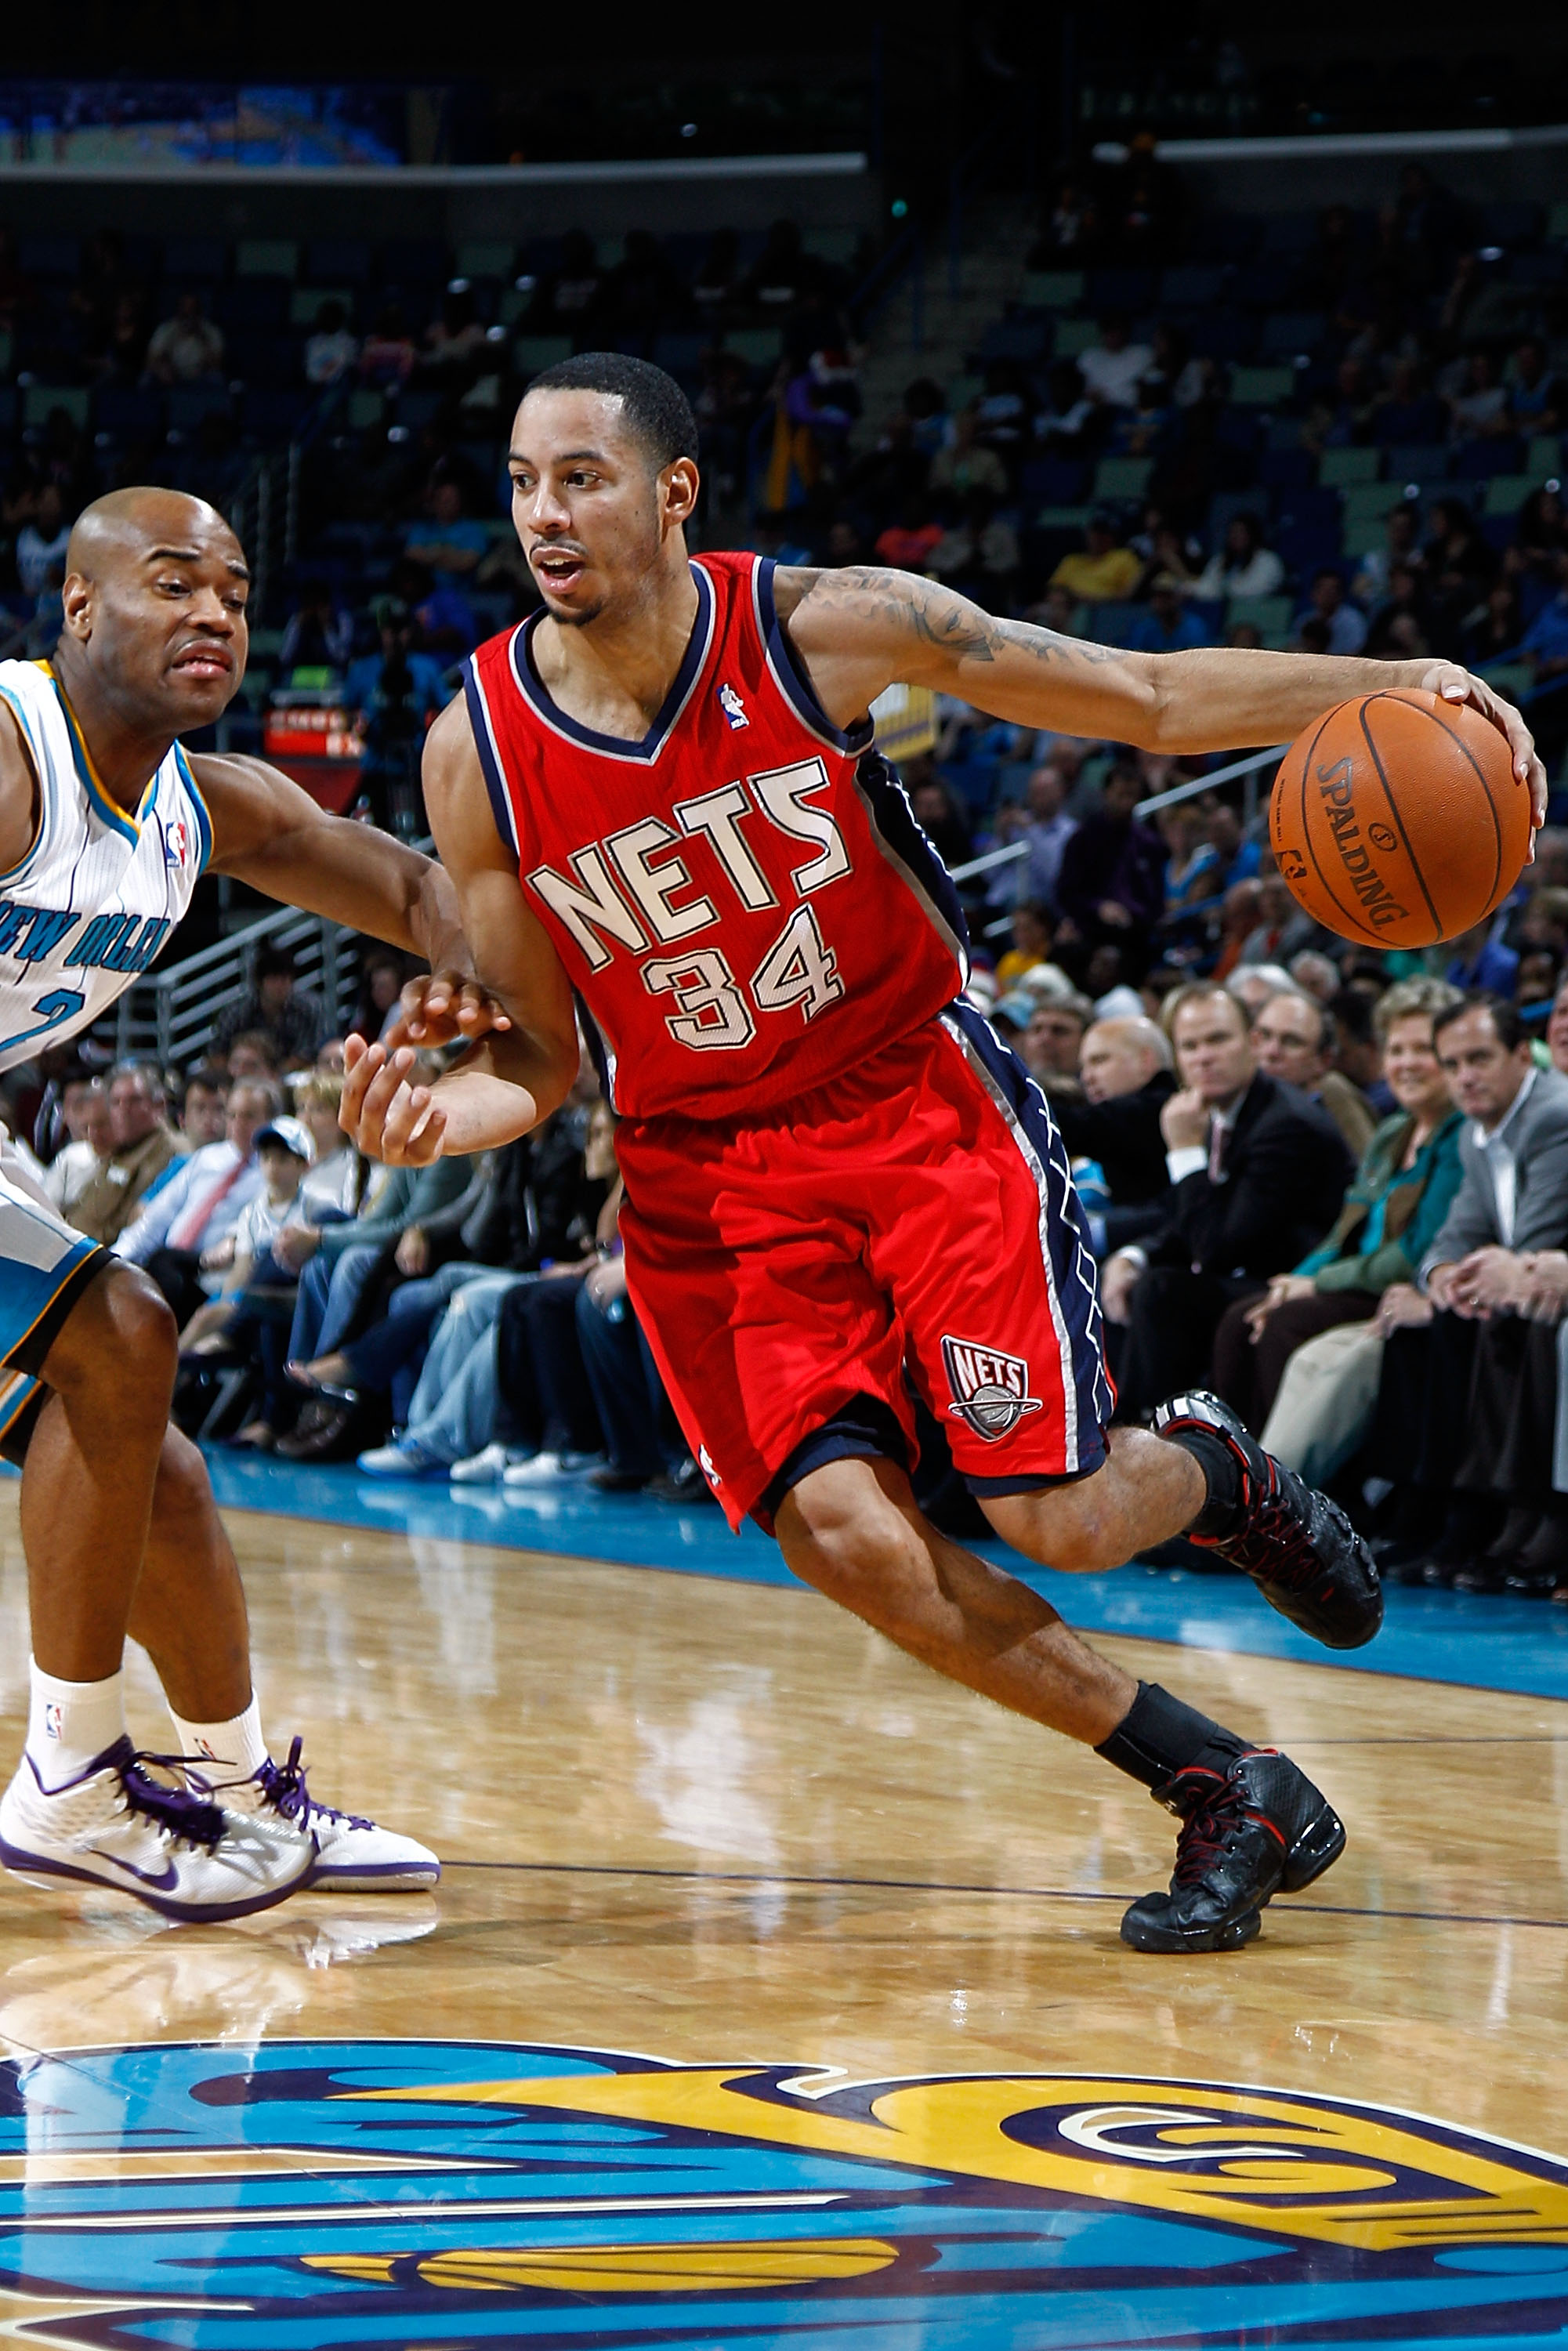 NEW ORLEANS, LA - DECEMBER 22:  Devin Harris #34 of the New Jersey Nets drives the ball around Jarrett Jack #2  of the New Orleans Hornets at the New Orleans Arena on December 22, 2010 in New Orleans, Louisiana.    The Hornets defeated the Nets 105-91.   